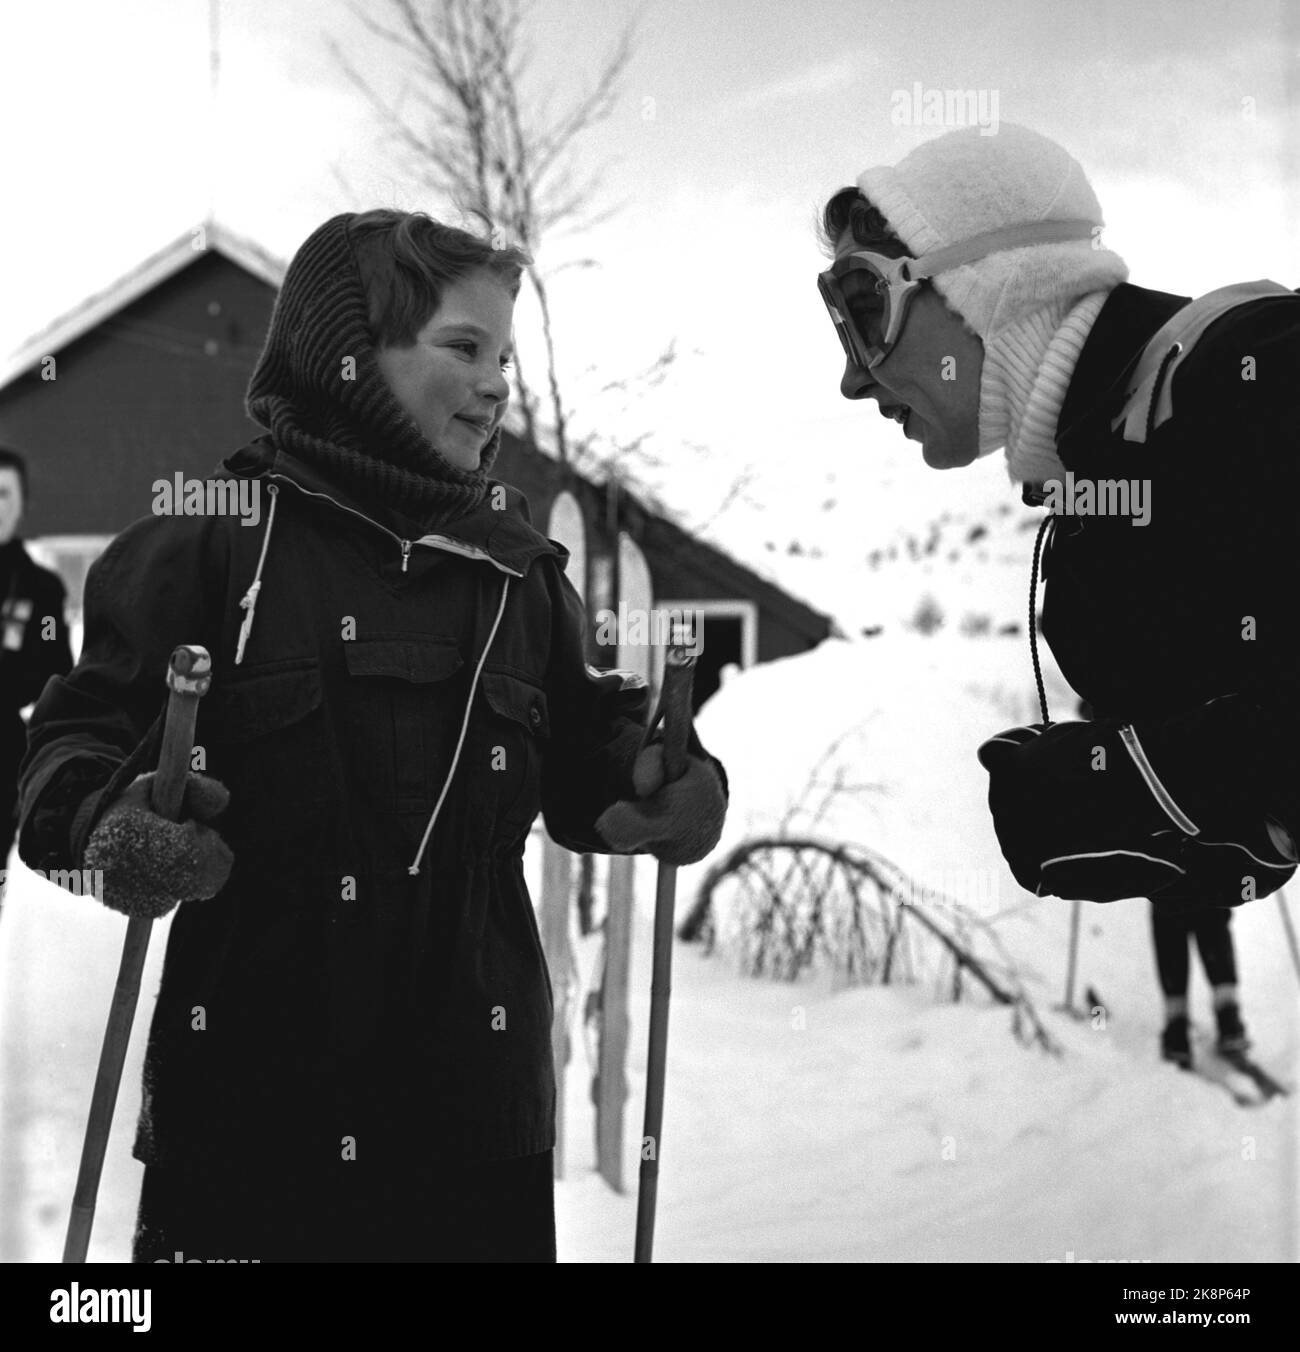 Gausdal 1955 - Queen Ingrid of Denmark on a private winter holiday in Norway with her three daughters, inheritance princess Margrethe, Princess Benedikte and Princess Anne -Marie. Queen Ingrid has not had skis on his legs in 20 years. In the picture, Queen Ingrid has a chat with her youngest daughter Princess Anne Marie. Photo: Sverre A. Børretzen / Current / NTB Stock Photo